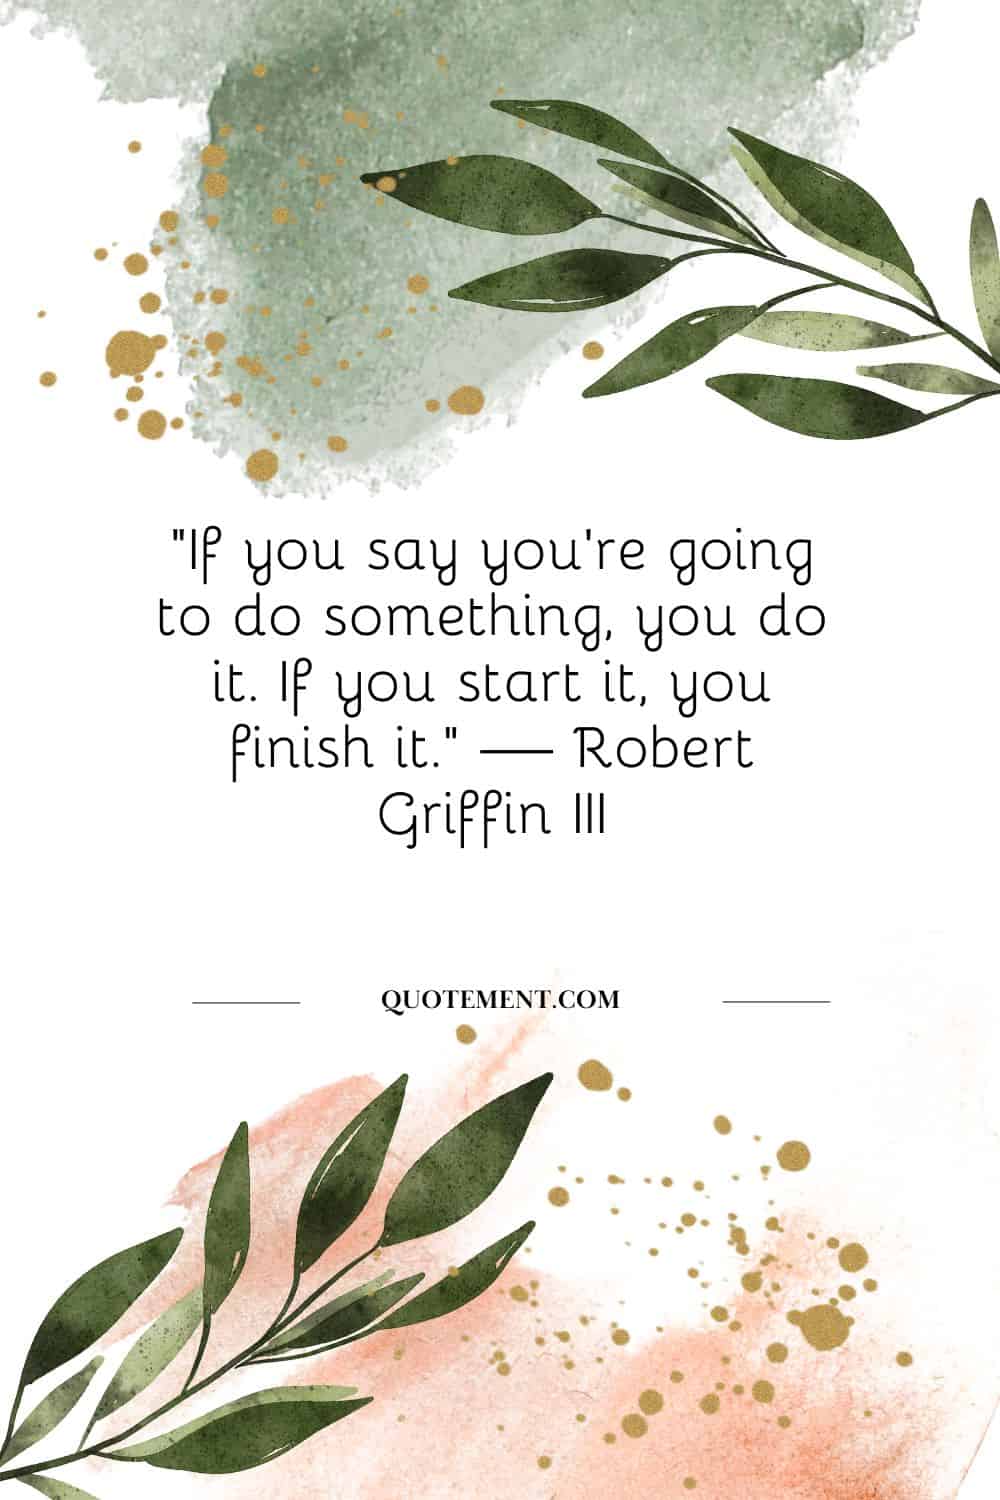 “If you say you’re going to do something, you do it. If you start it, you finish it.” — Robert Griffin III